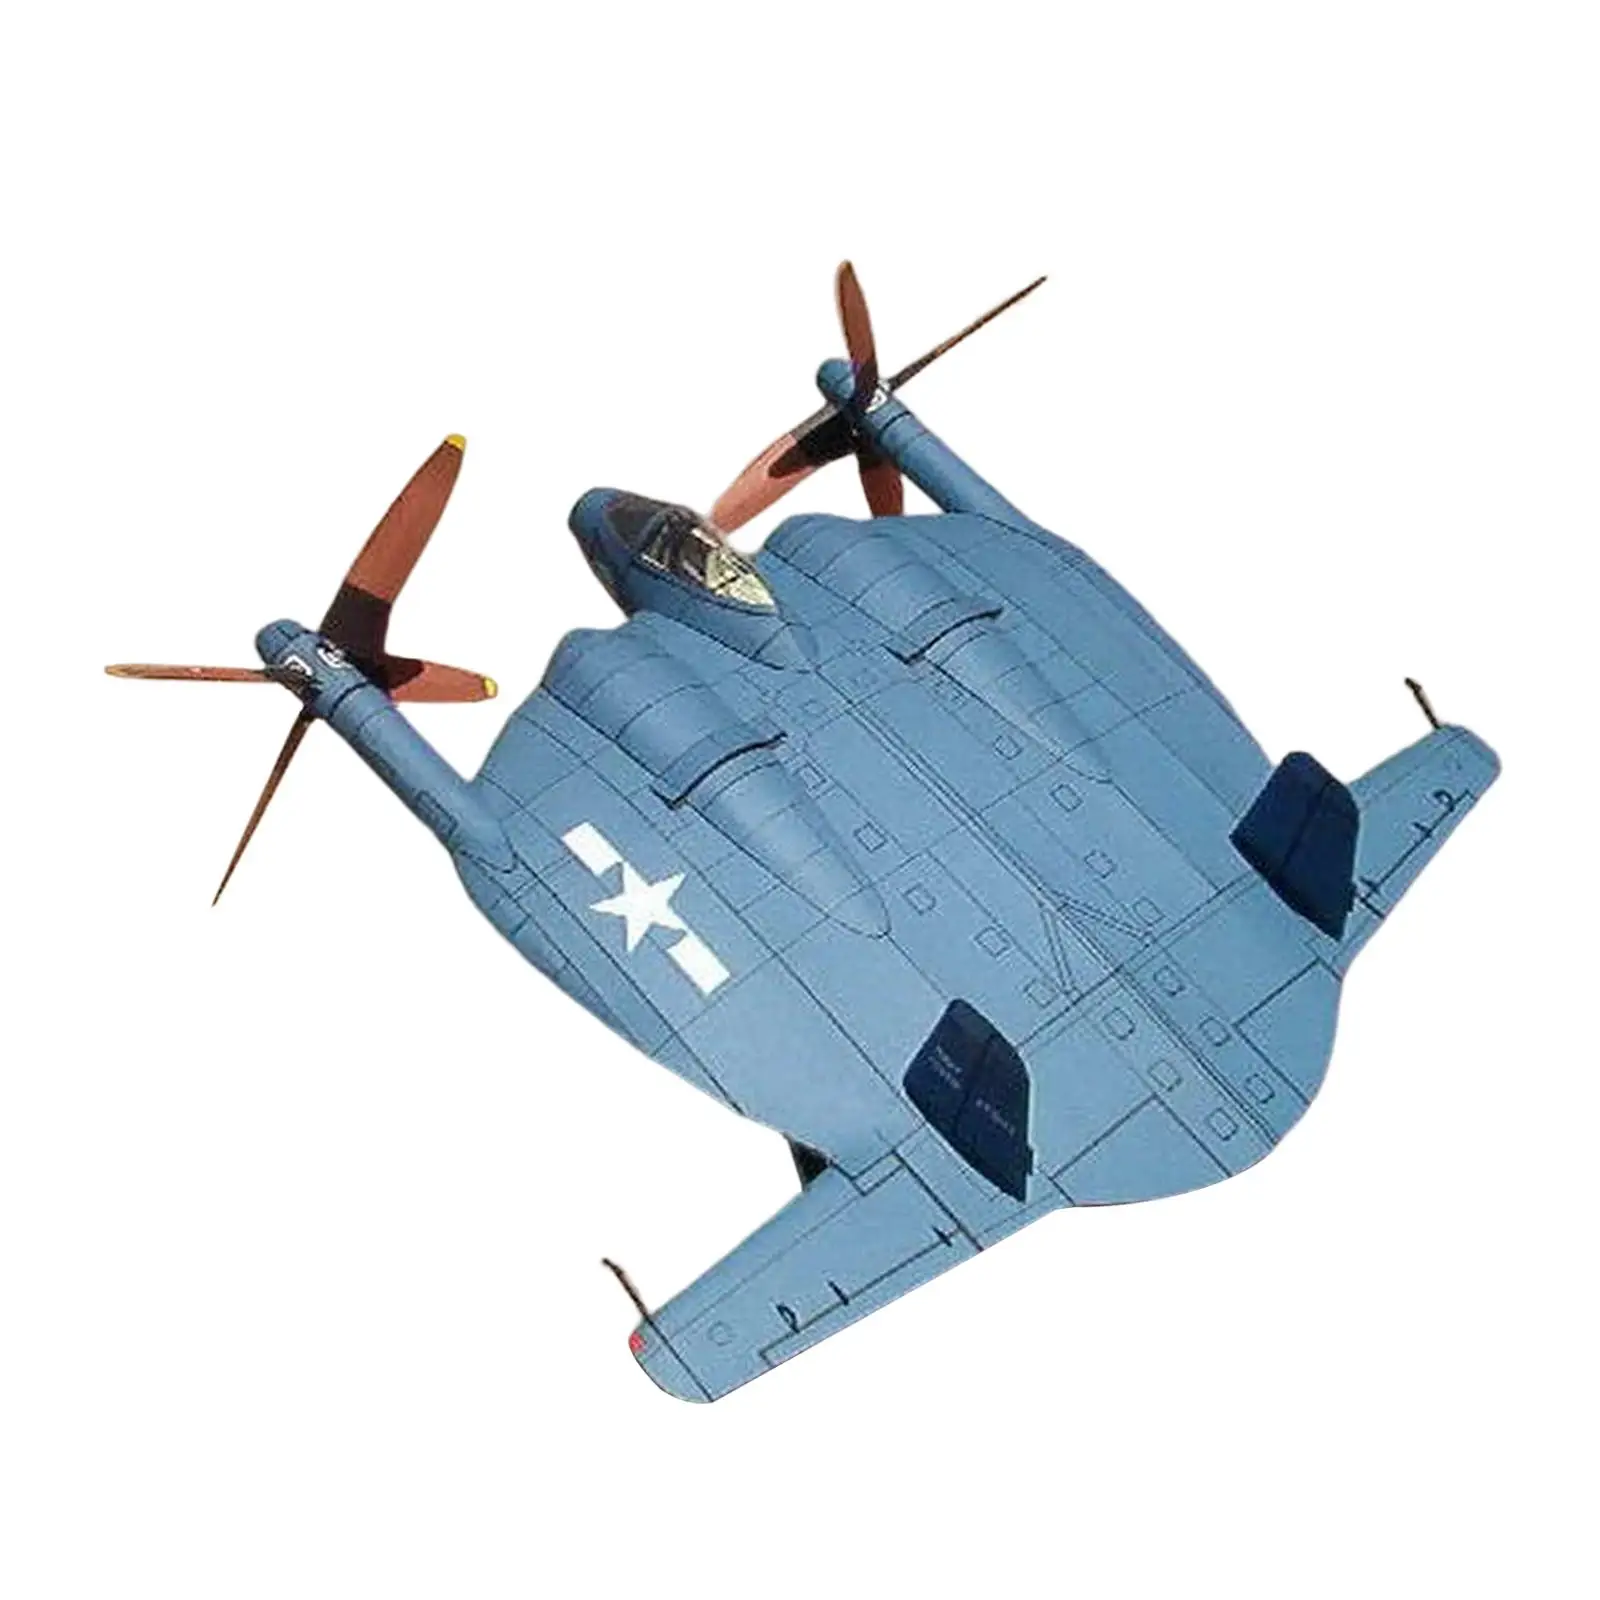 Assemble Air Aviation aircraft Paper Model Simulation 3D Hobby Fighter Model Toy for Tabletop Shelf Kids Gift Decoration